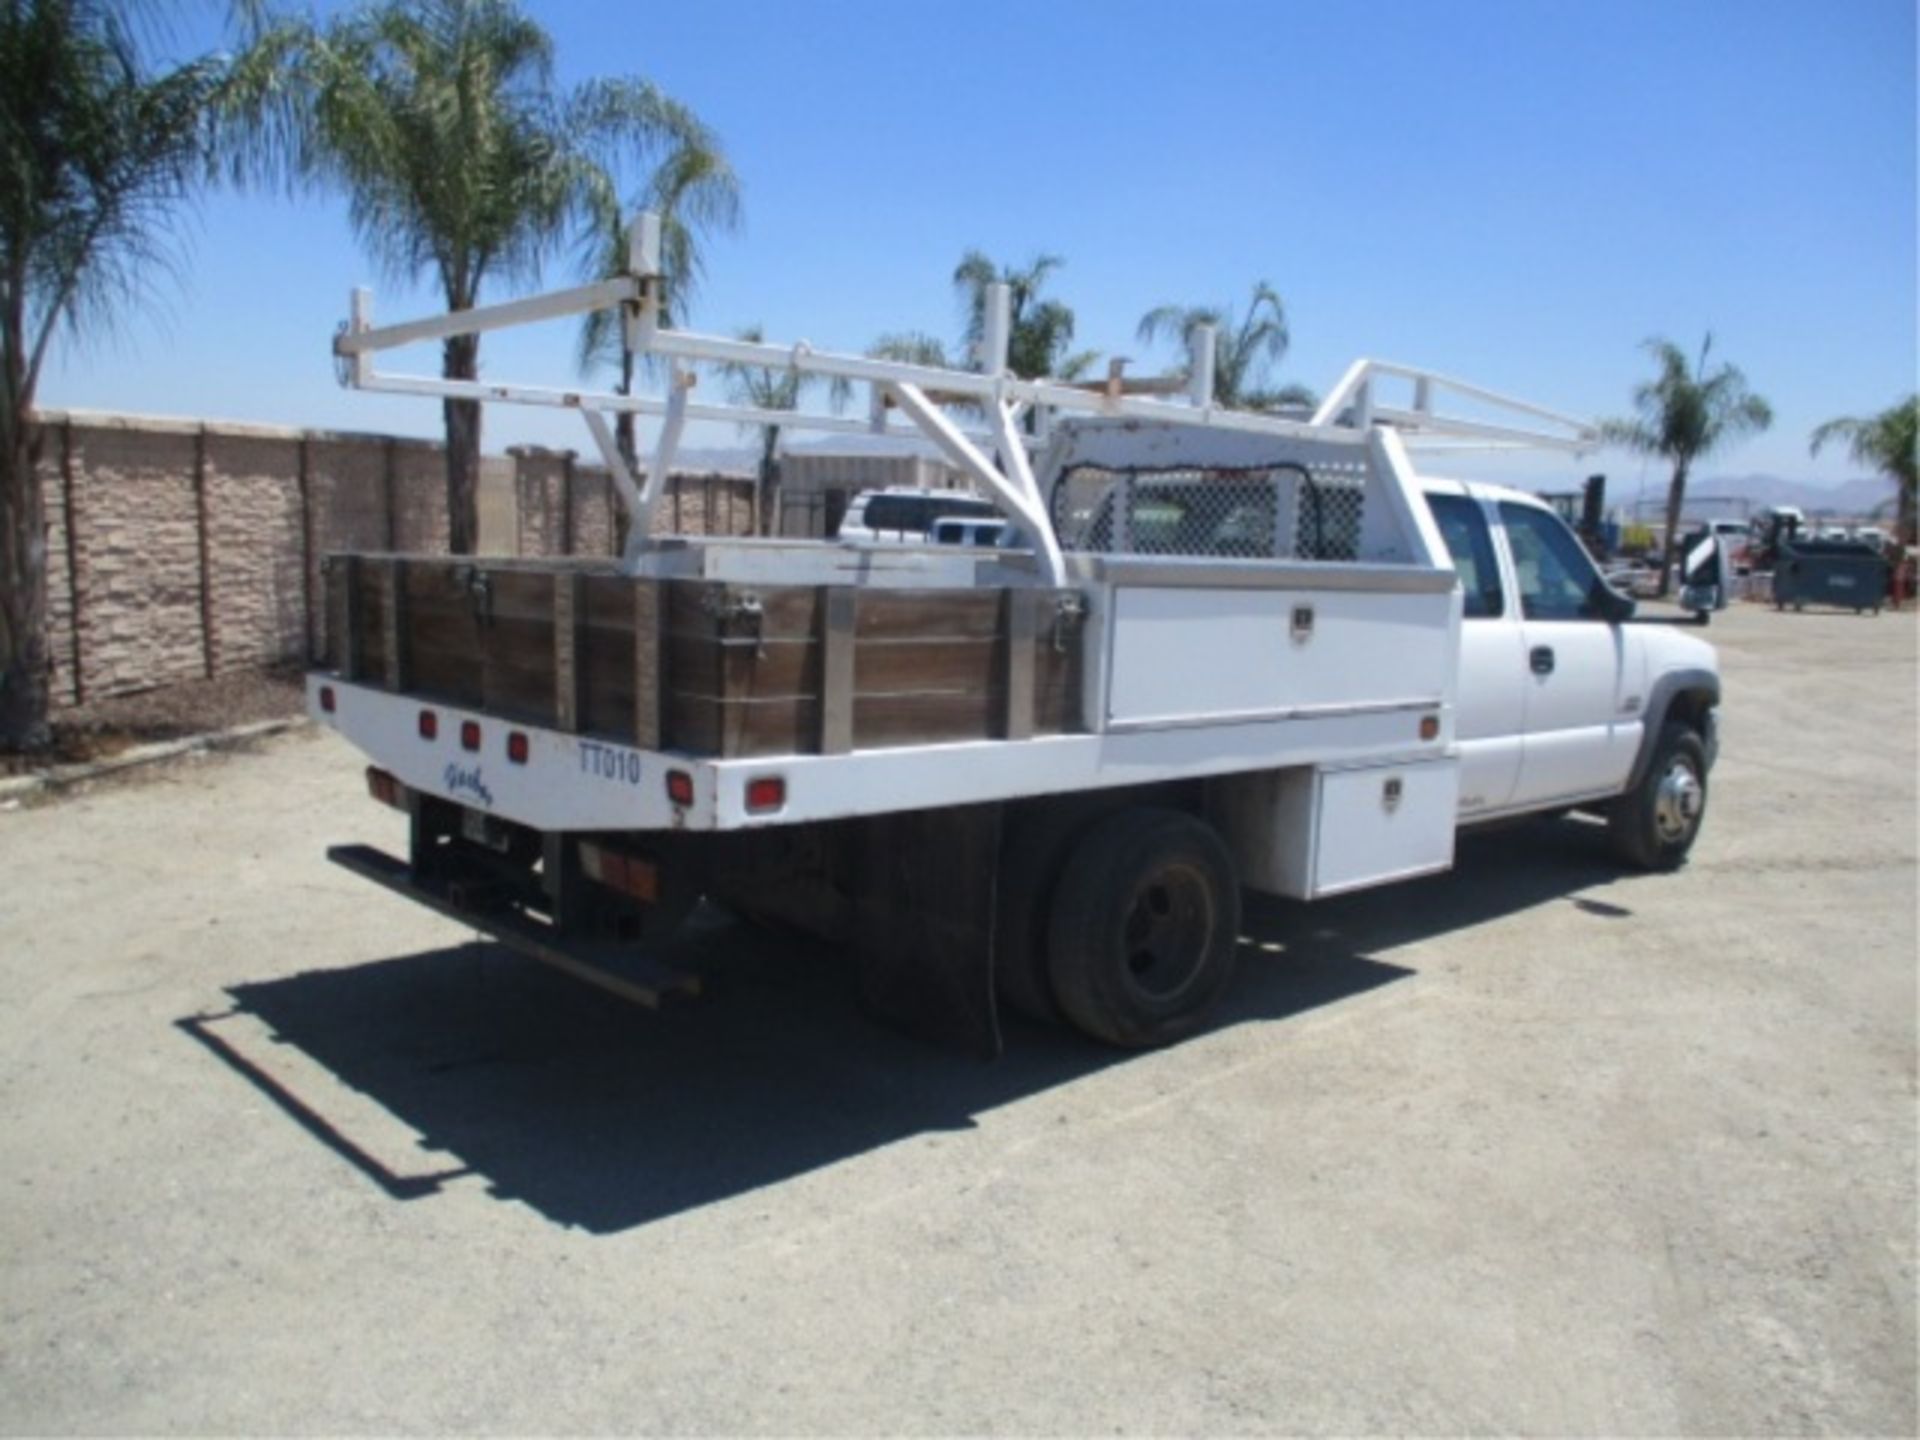 2006 Chevrolet 3500 Extended-Cab Utility Truck, 6.6L Turbo Diesel, Automatic, Tool Boxes, Lumber - Image 14 of 71